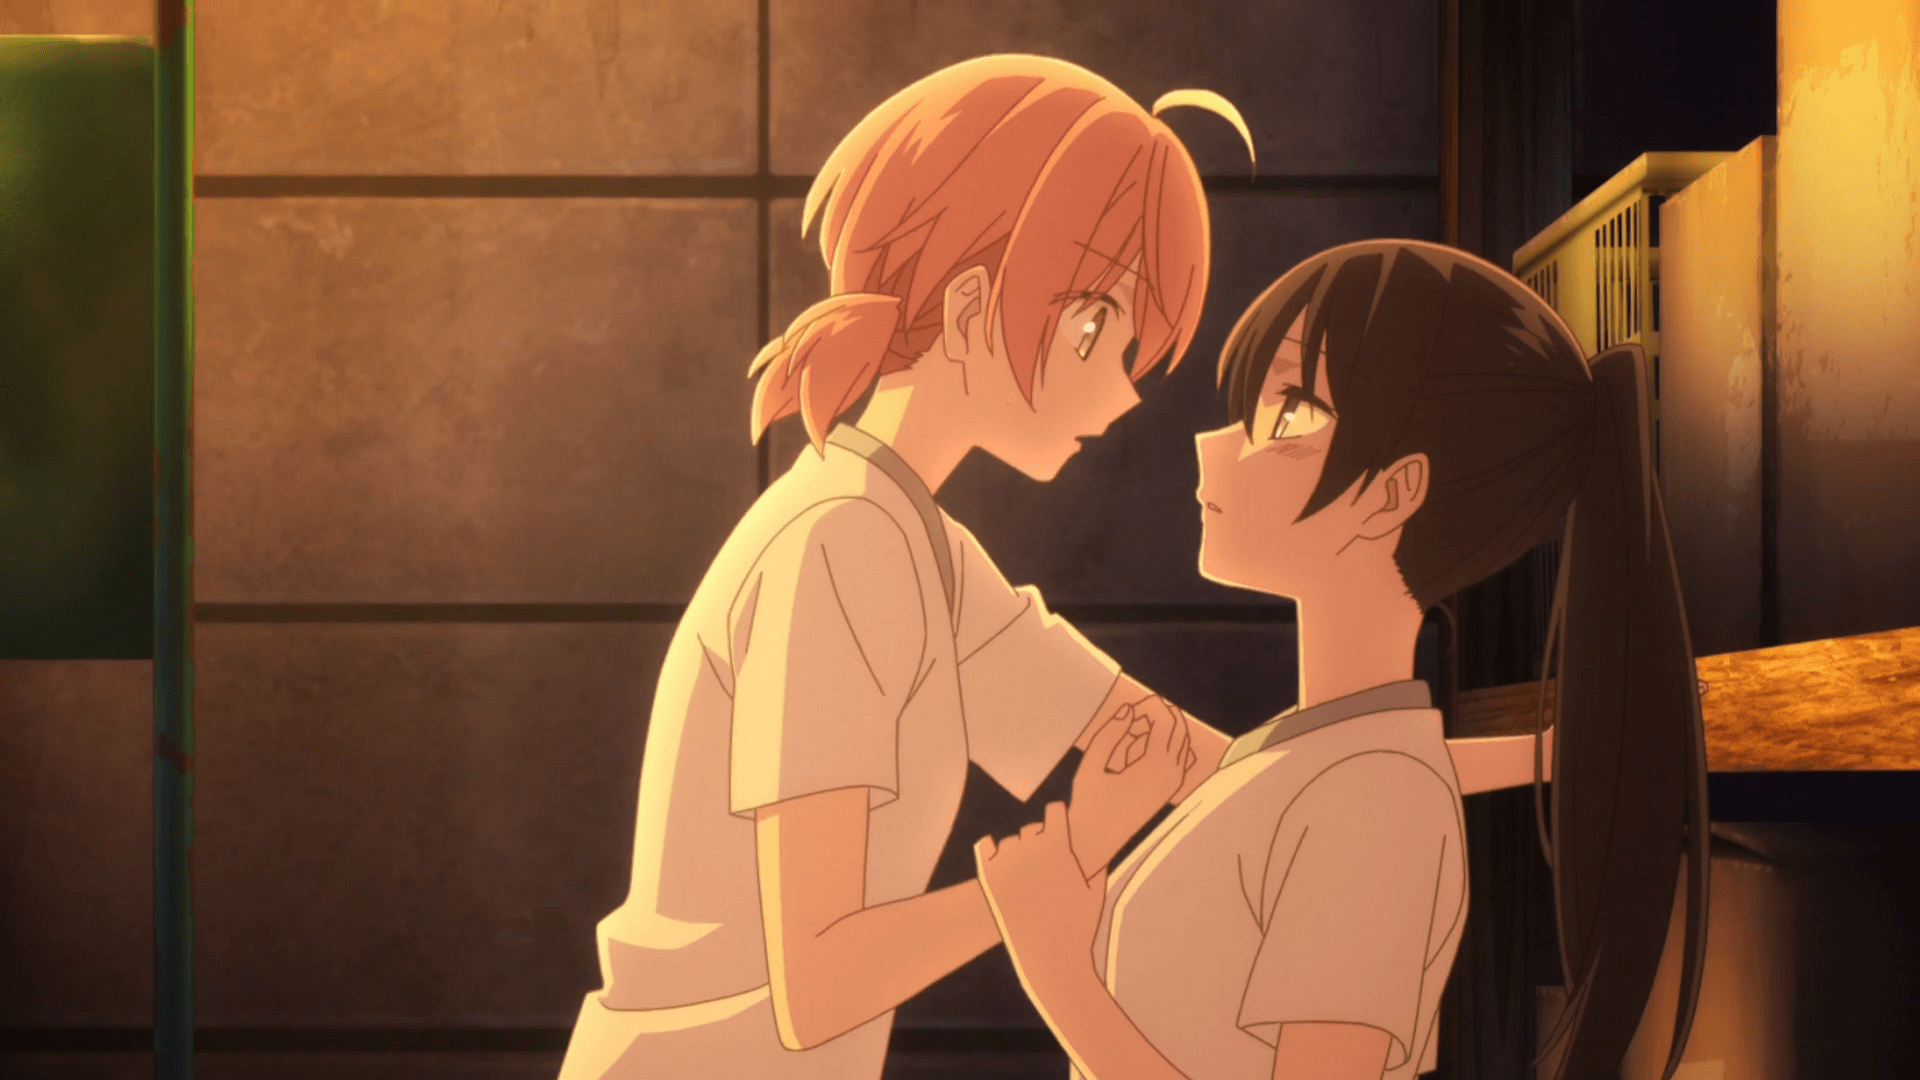 Bloom Into You Wallpapers - Top Free Bloom Into You Backgrounds